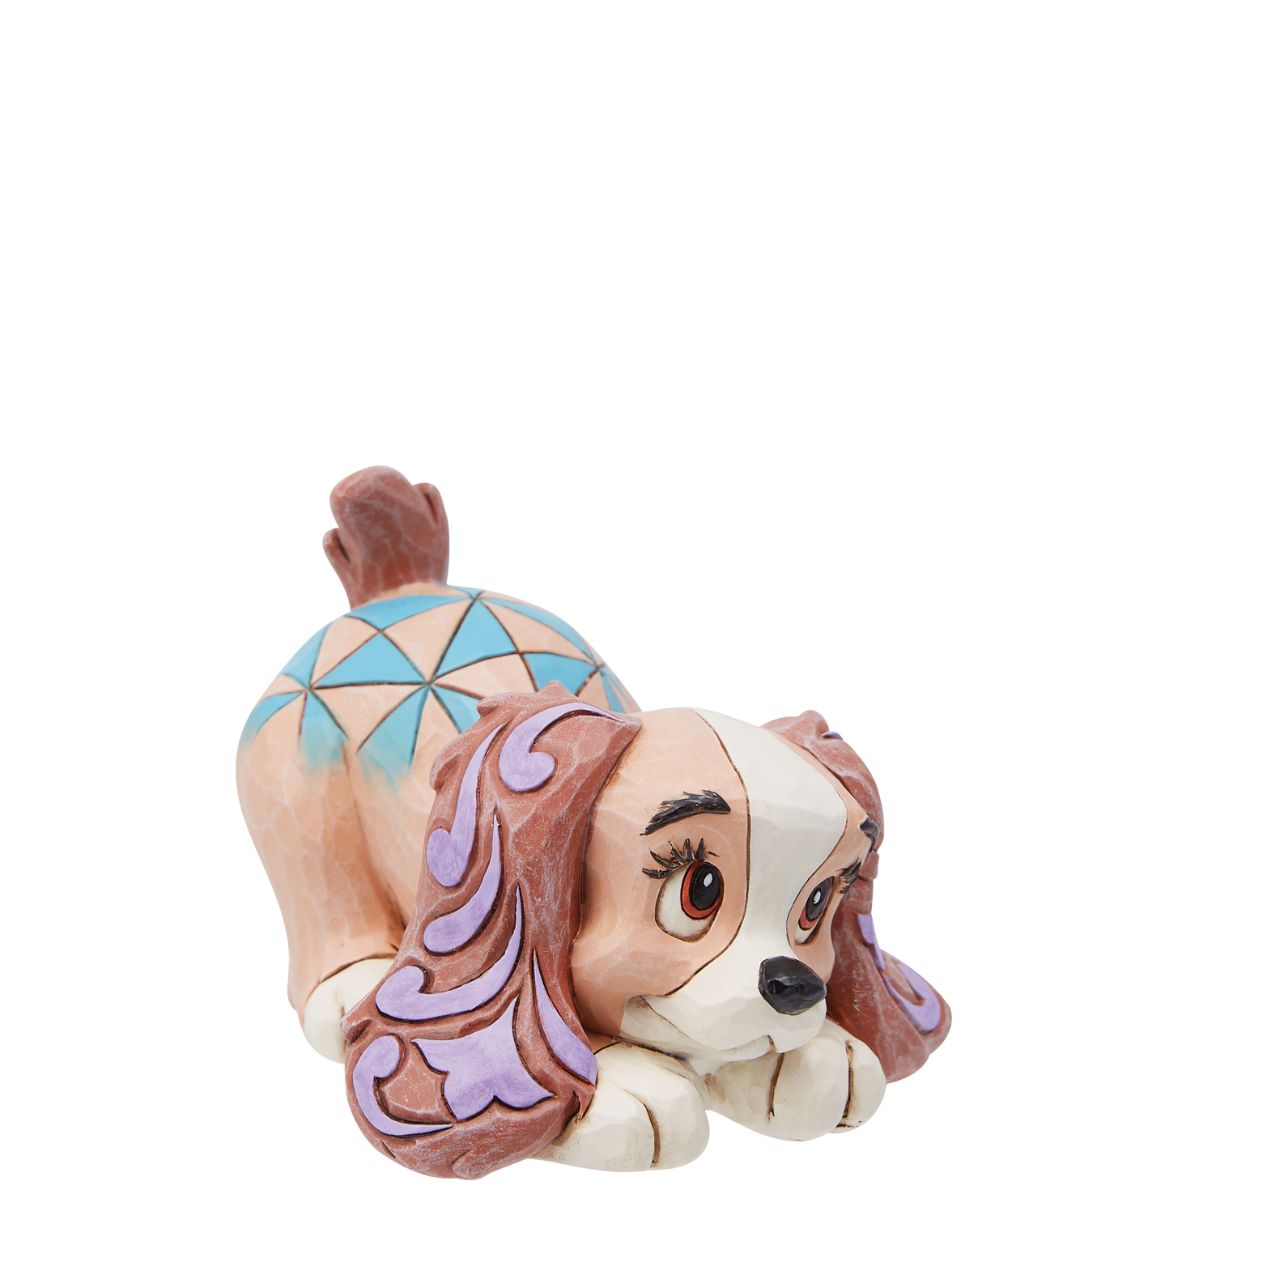 The Disney Traditions collection by Jim Shore brings you an enchanting upgrade of Lady from Lady and the Tramp| This mini animal figurine showcases Lady in a cute and instantly recognizable way, making it an absolutely irresistible addition to your collection.